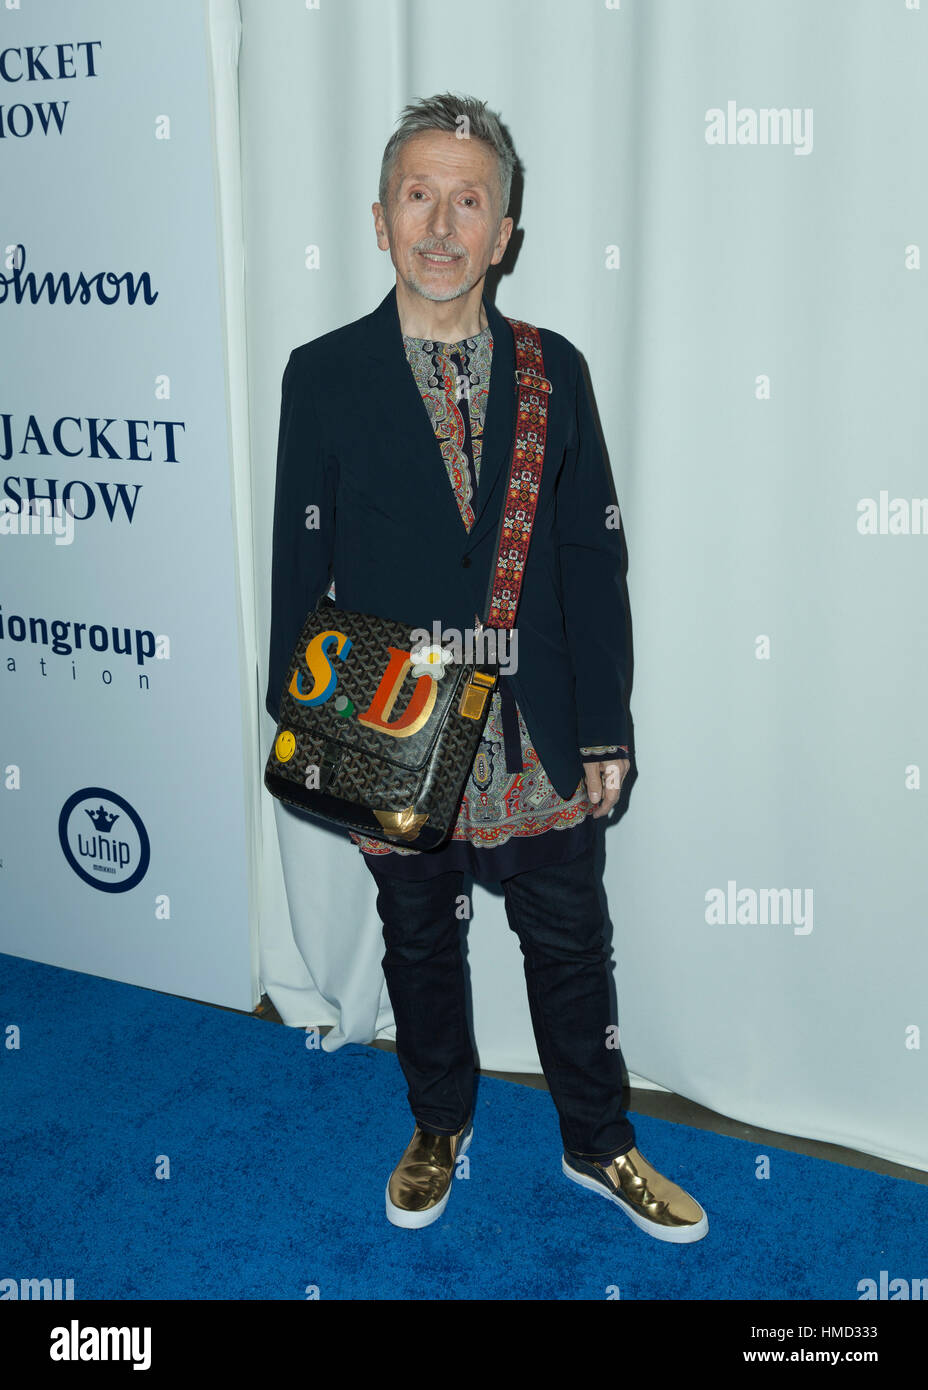 New York, United States. 01st Feb, 2017. Simon Doonan attends the blue jacket fashon show in support for prostate cancer awarness during New York Fashion week at Pier 59 Credit: Lev Radin/Pacific Press/Alamy Live News Stock Photo